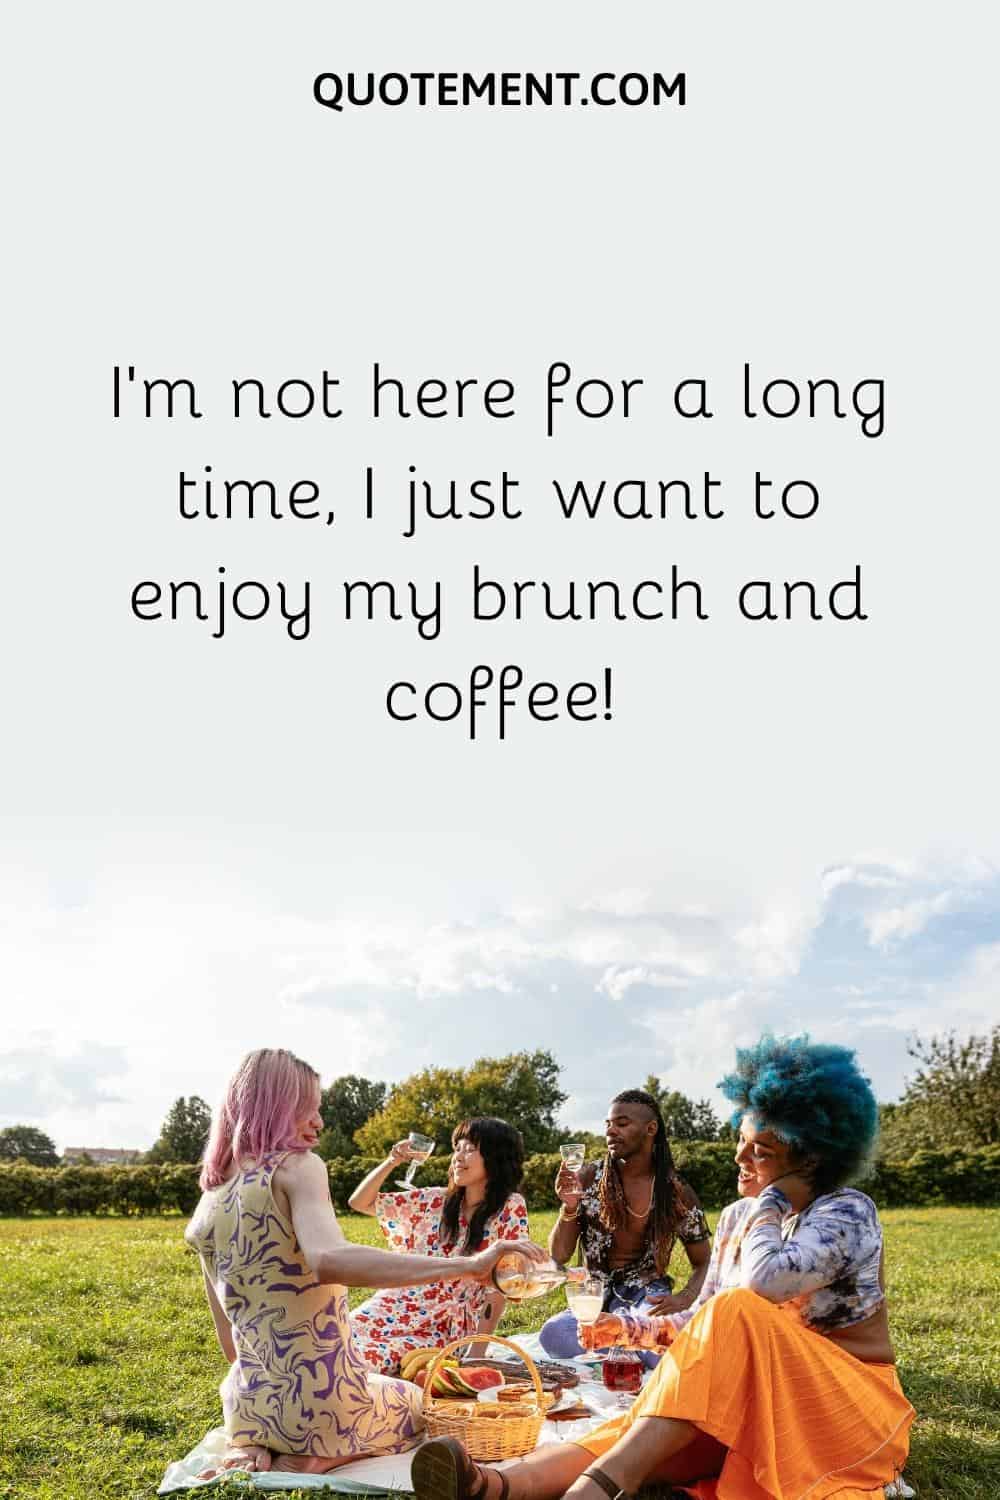 I'm not here for a long time, I just want to enjoy my brunch and coffee!